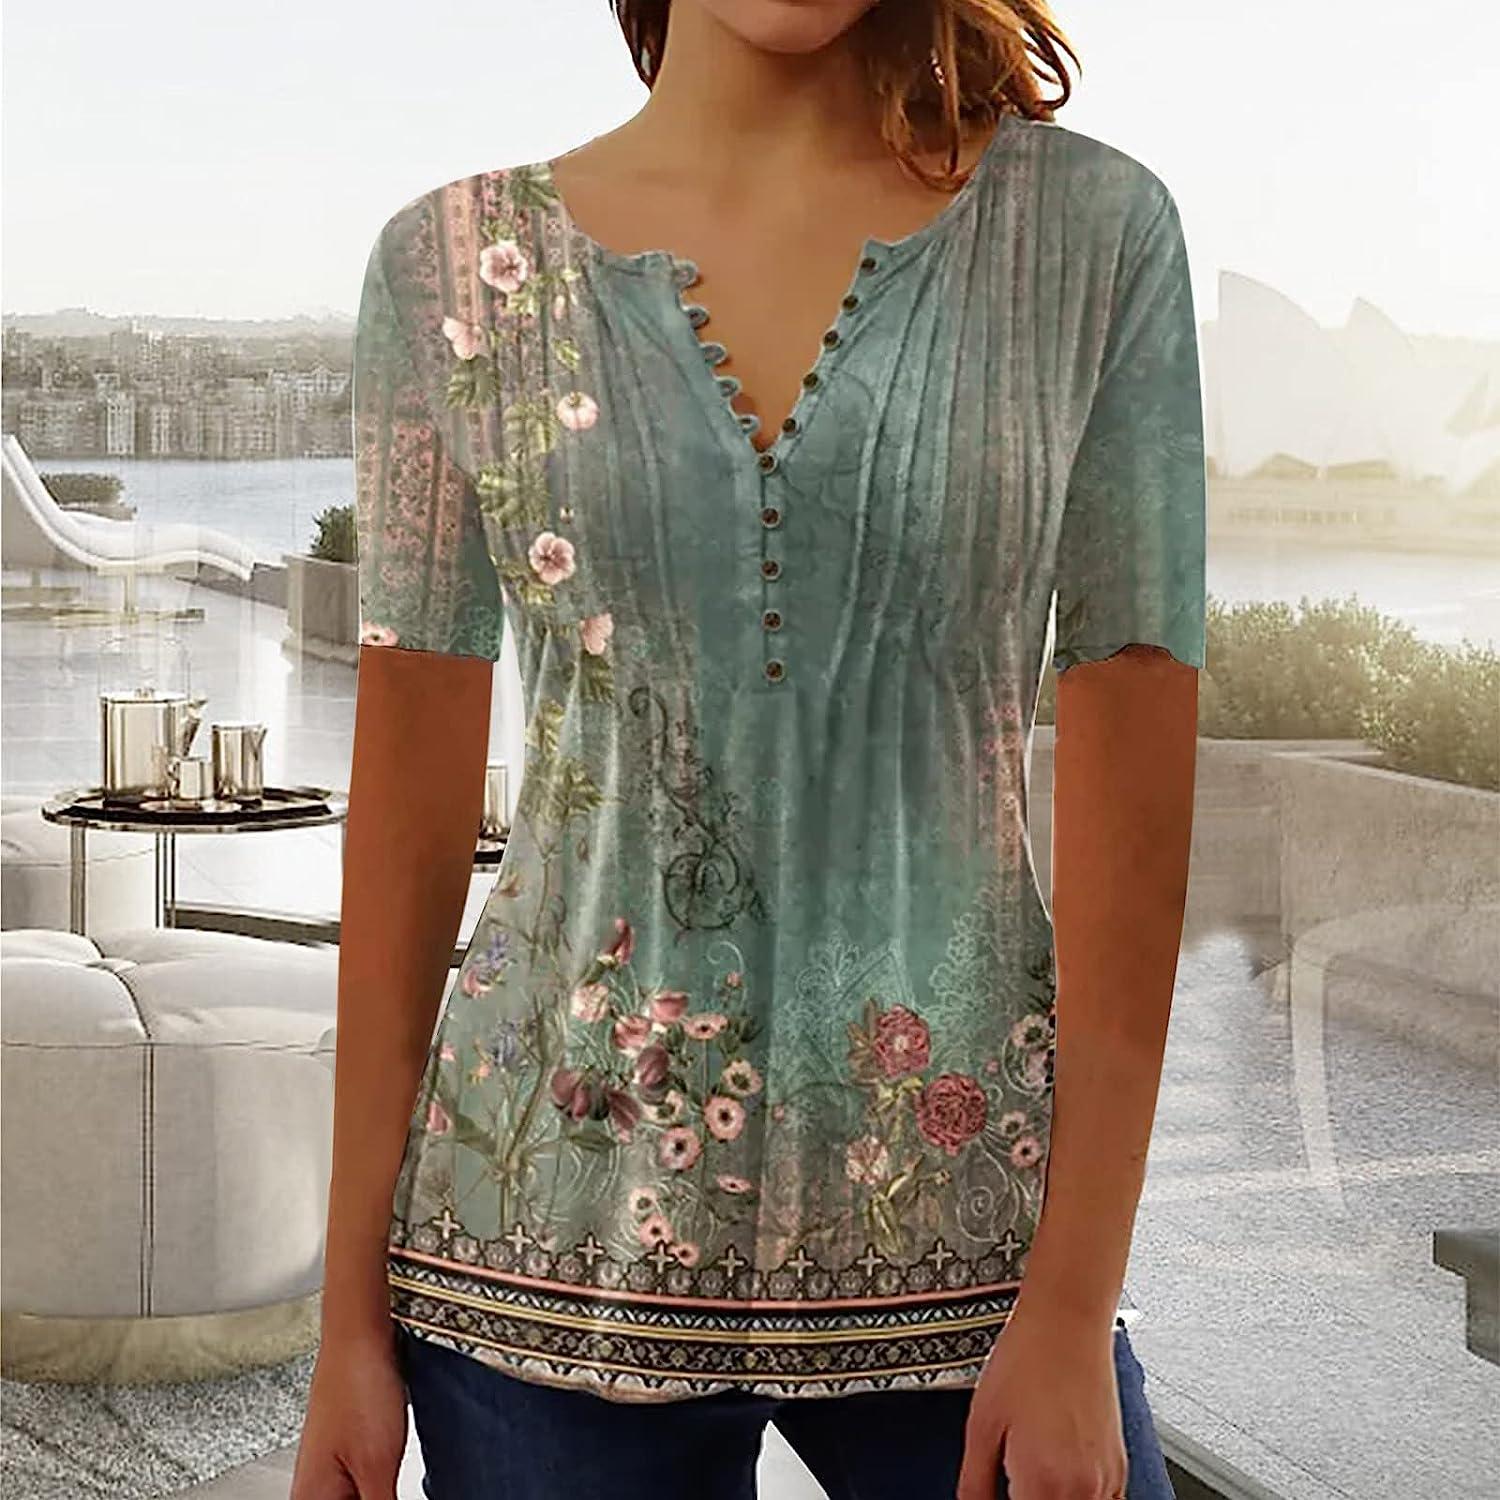 Floral Tops for Women Dressy Casual Short Sleeve V Neck Shirts